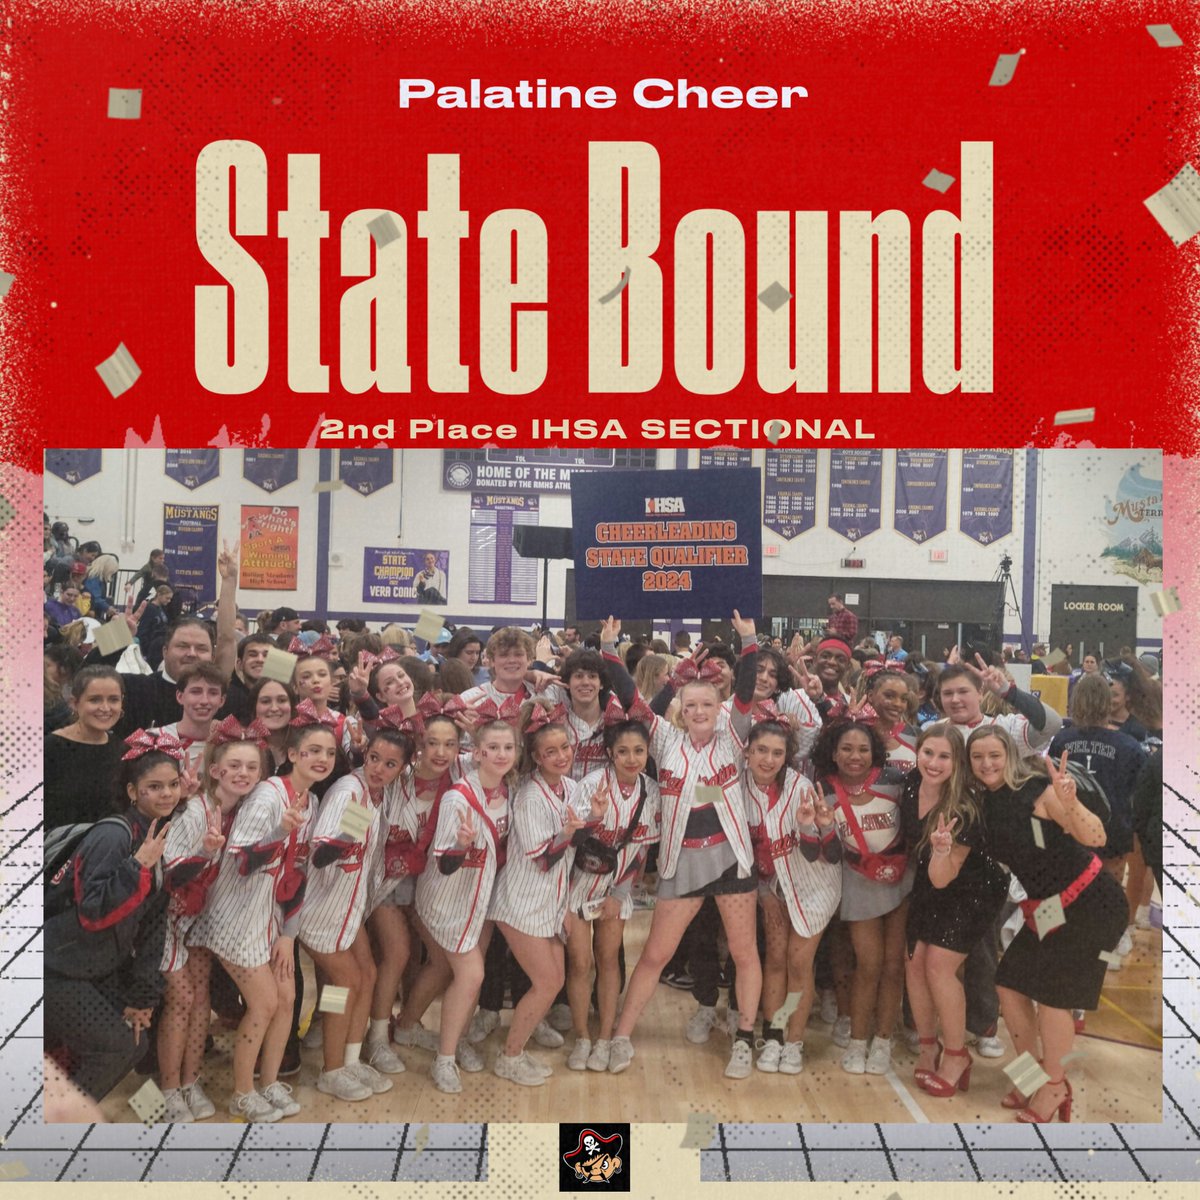 Congratulations to Coach Surell and the PHS Cheer team taking second place at the IHSA Sectional Competition this afternoon. The PIRATES are STATEBOUND! GO PIRATES!!